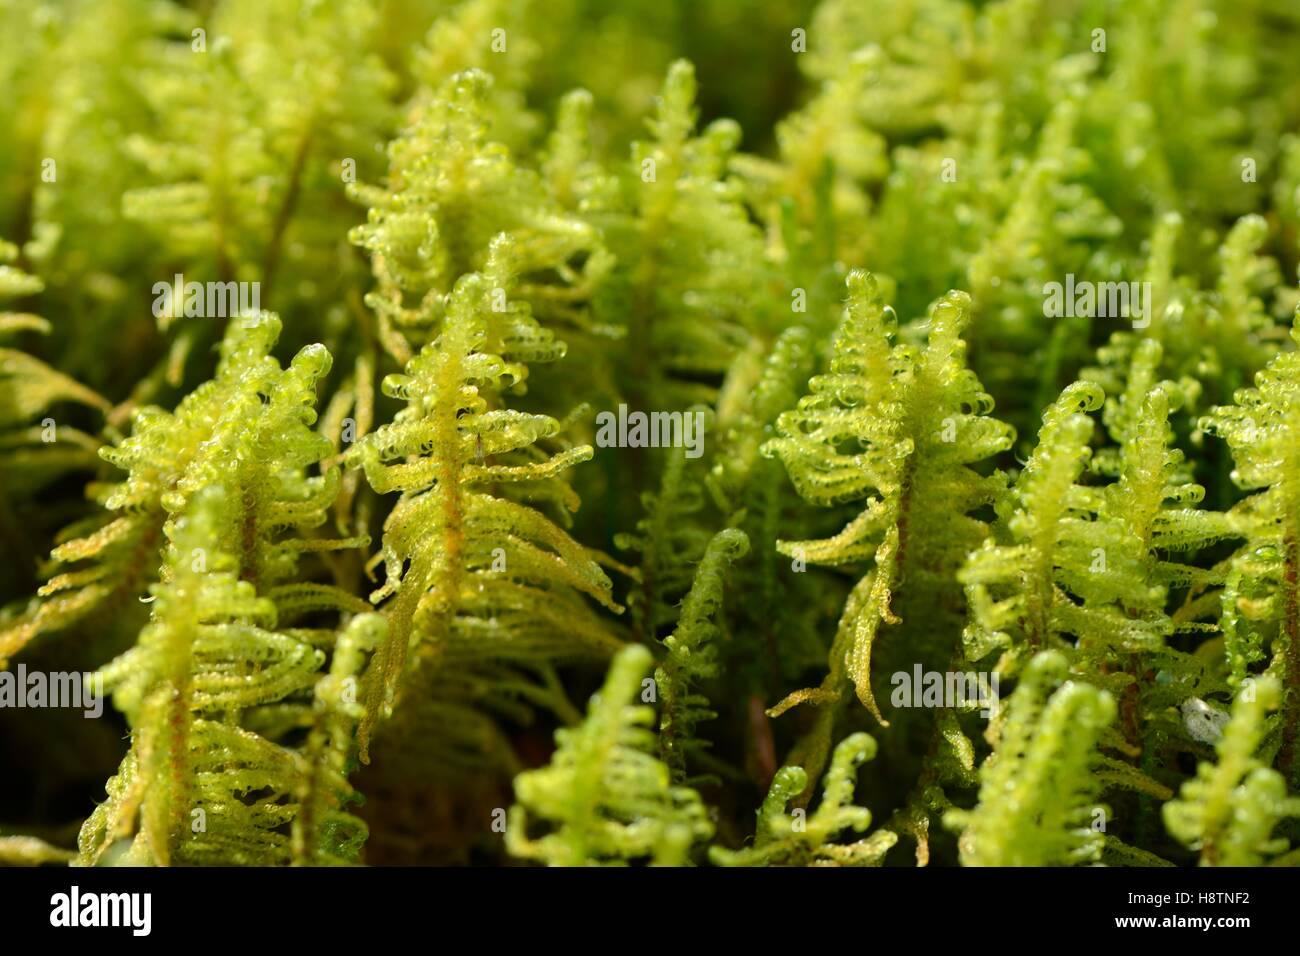 greater-whipwort-bazzania-trilobata-moss-on-rock-in-a-forest-in-scree-H8TNF2.jpg